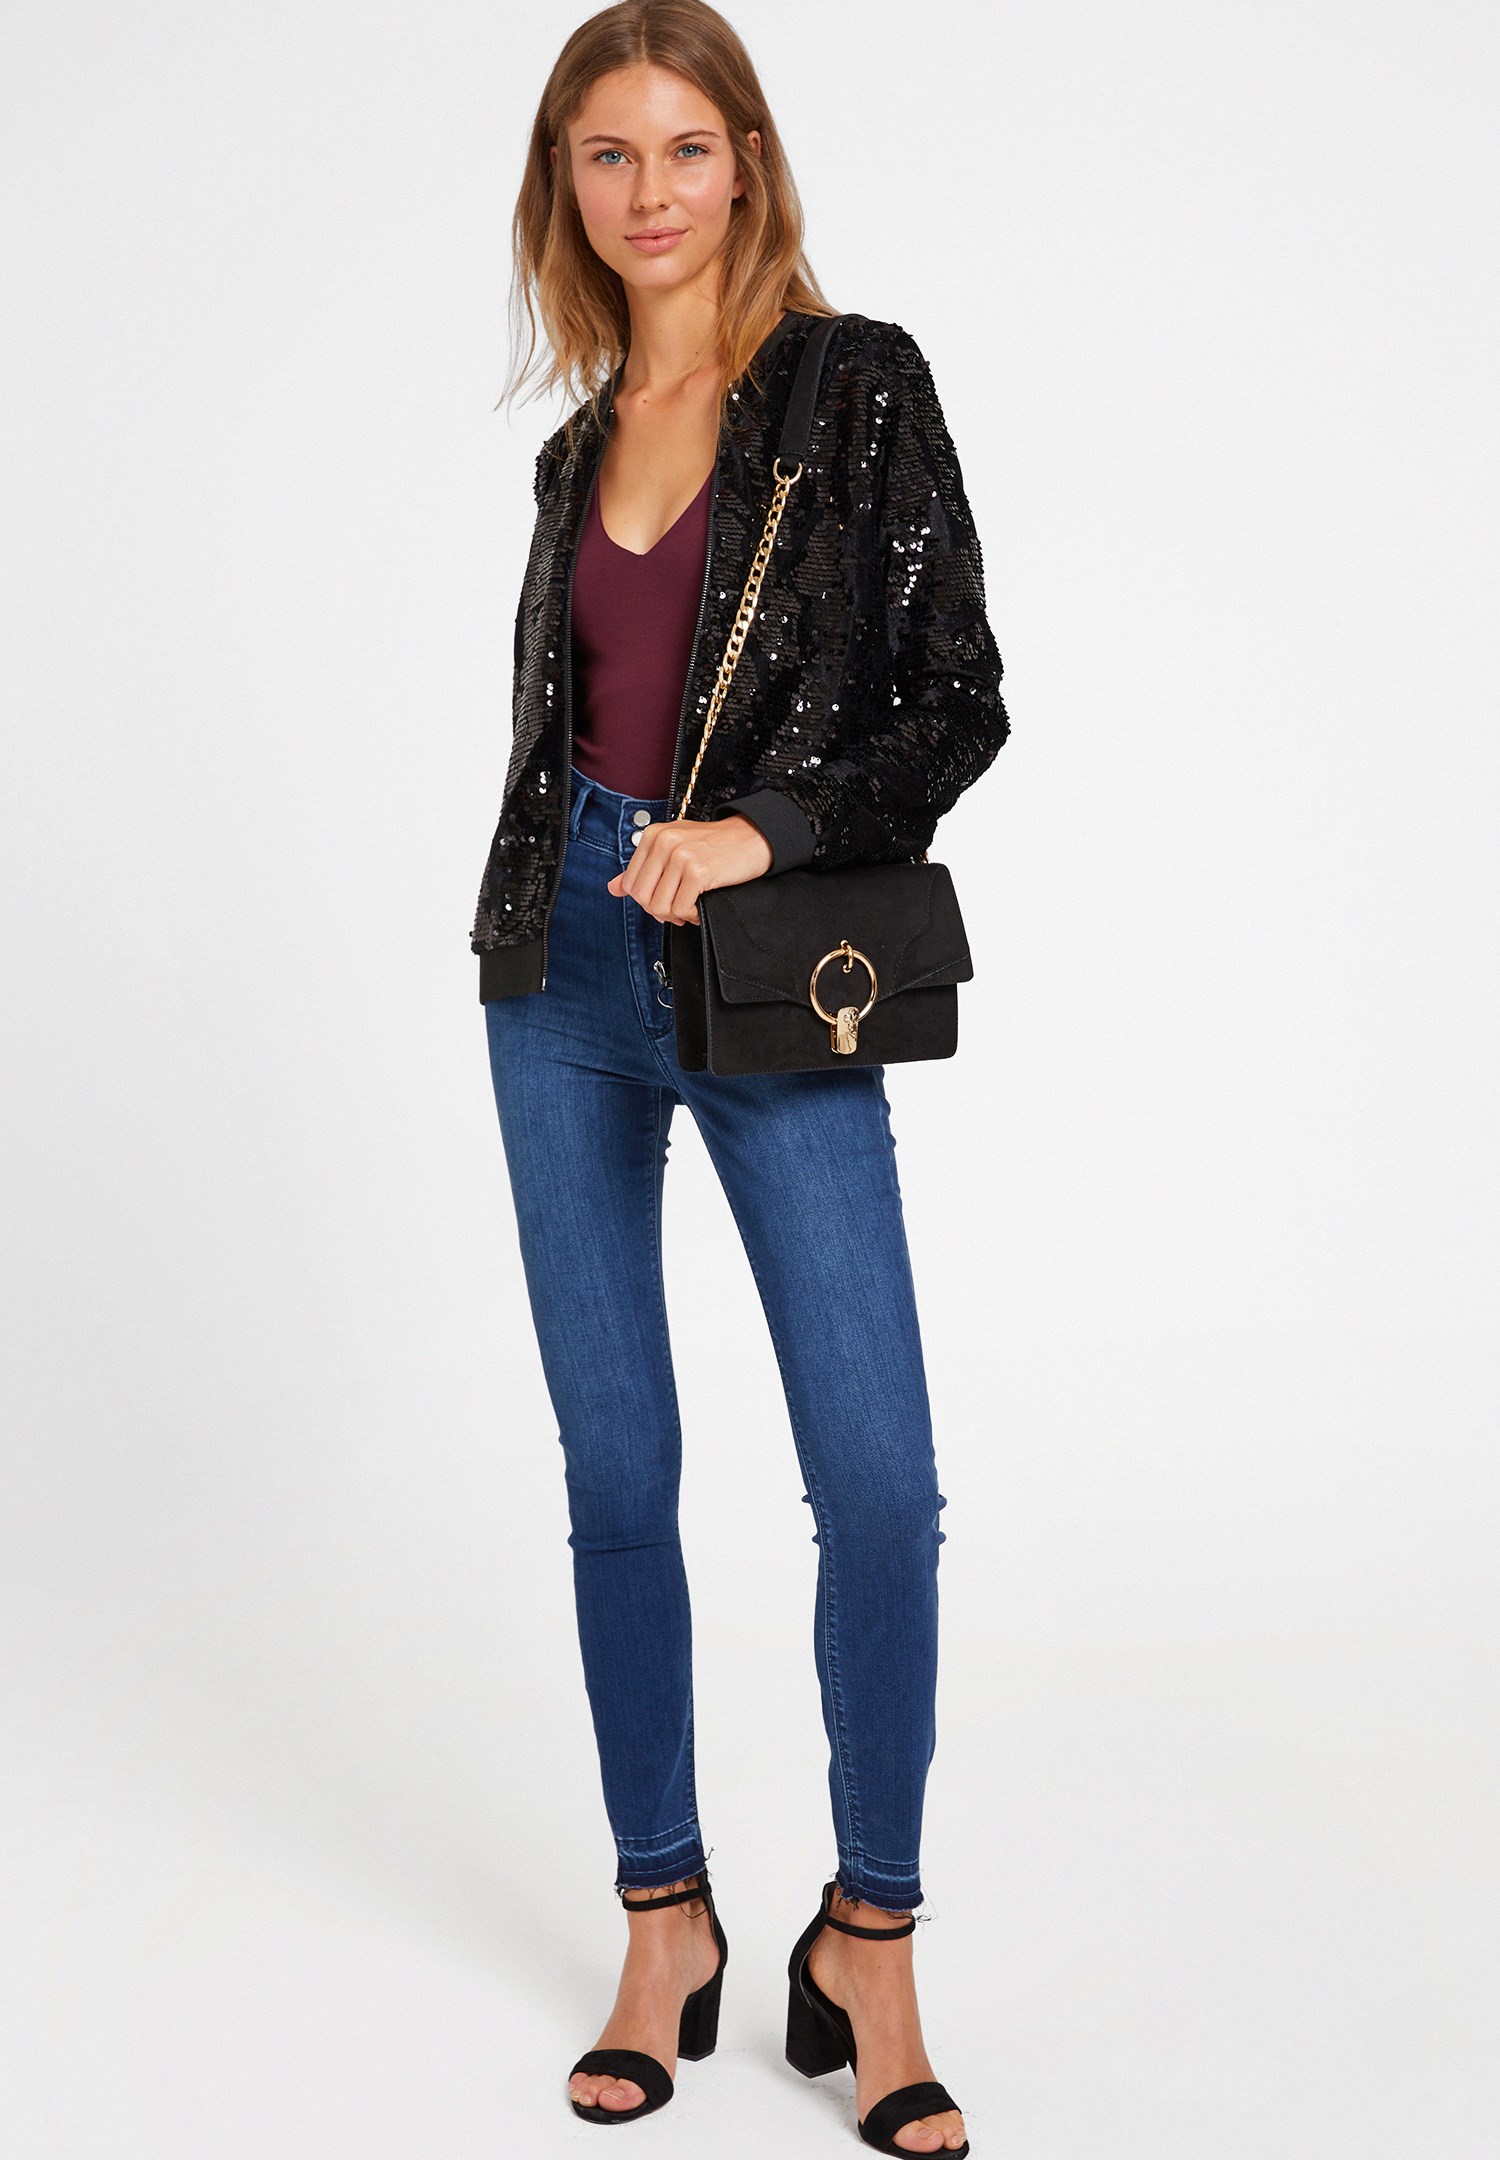 Women Black Jacket with Sequins Detail